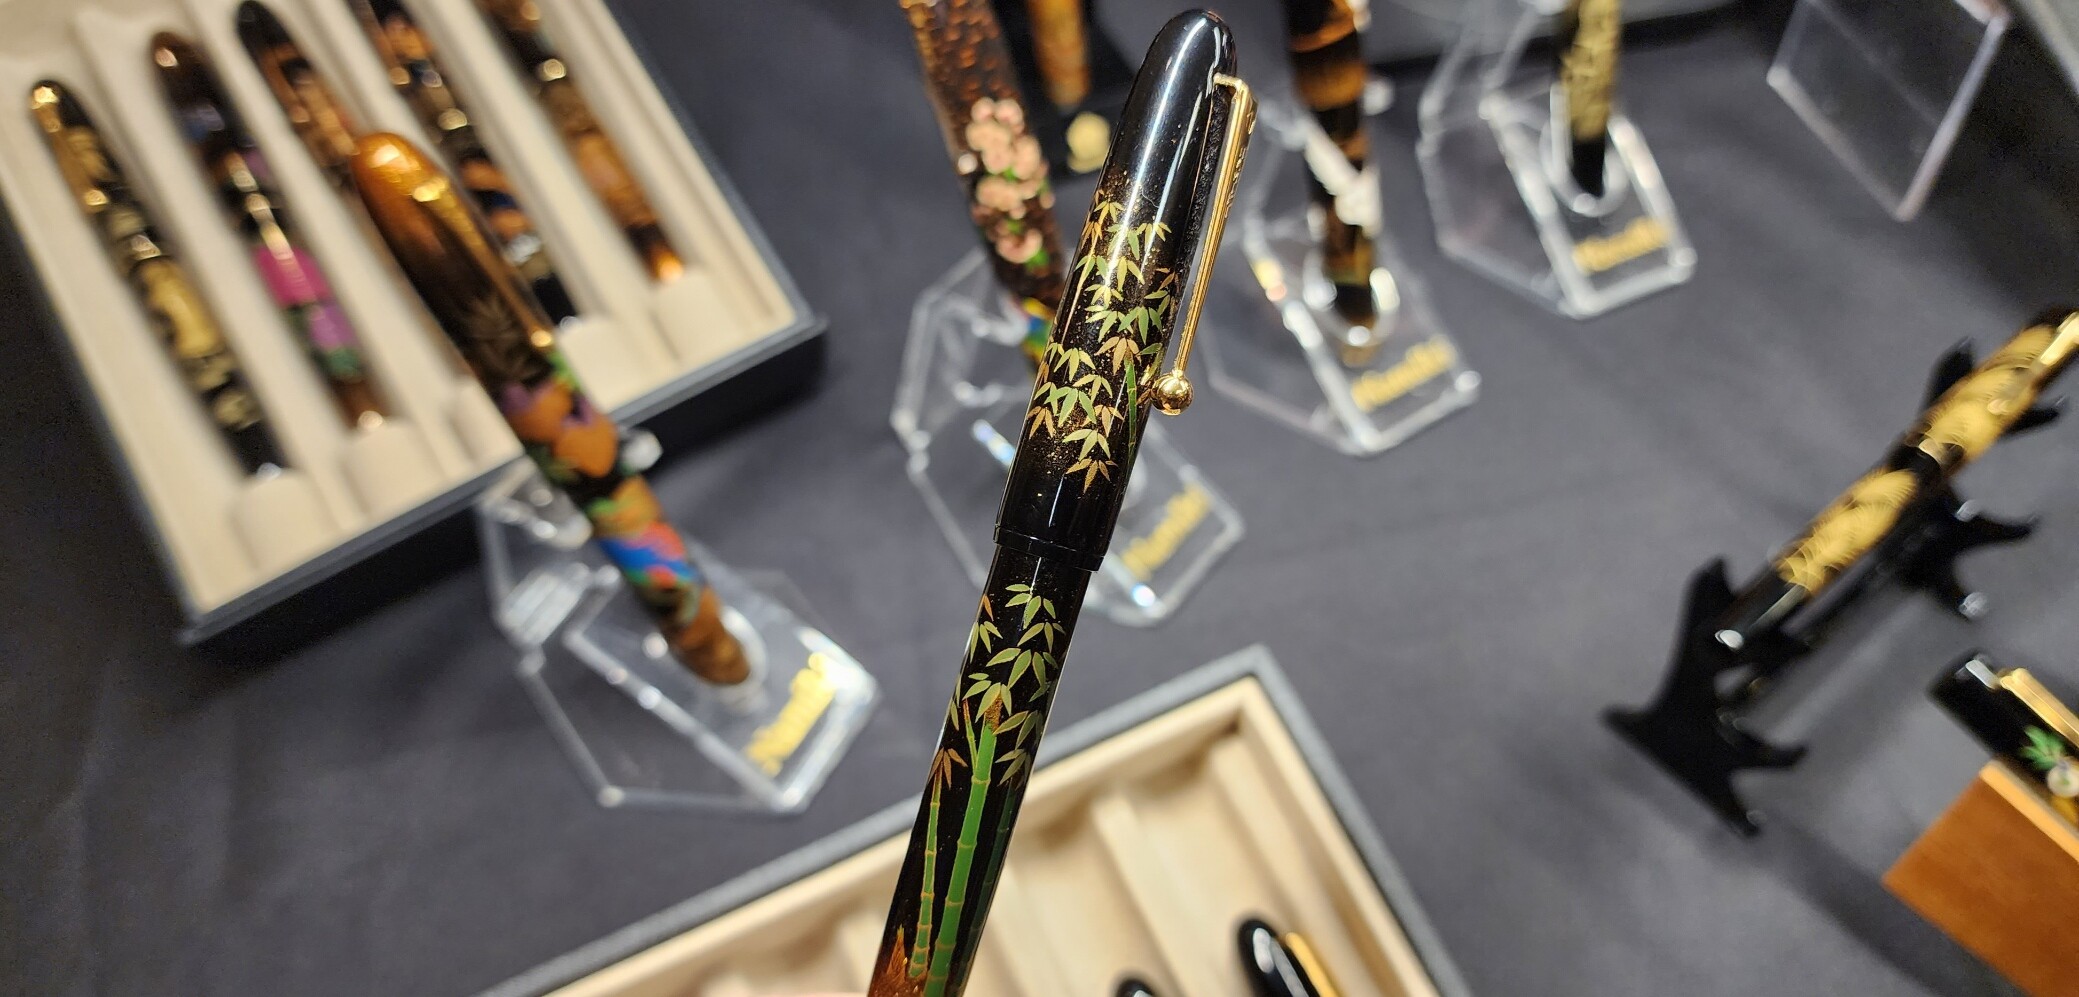 Namiki Yukari pen with Bamboo design and other Namiki Maki-e pens out of focus in the background.